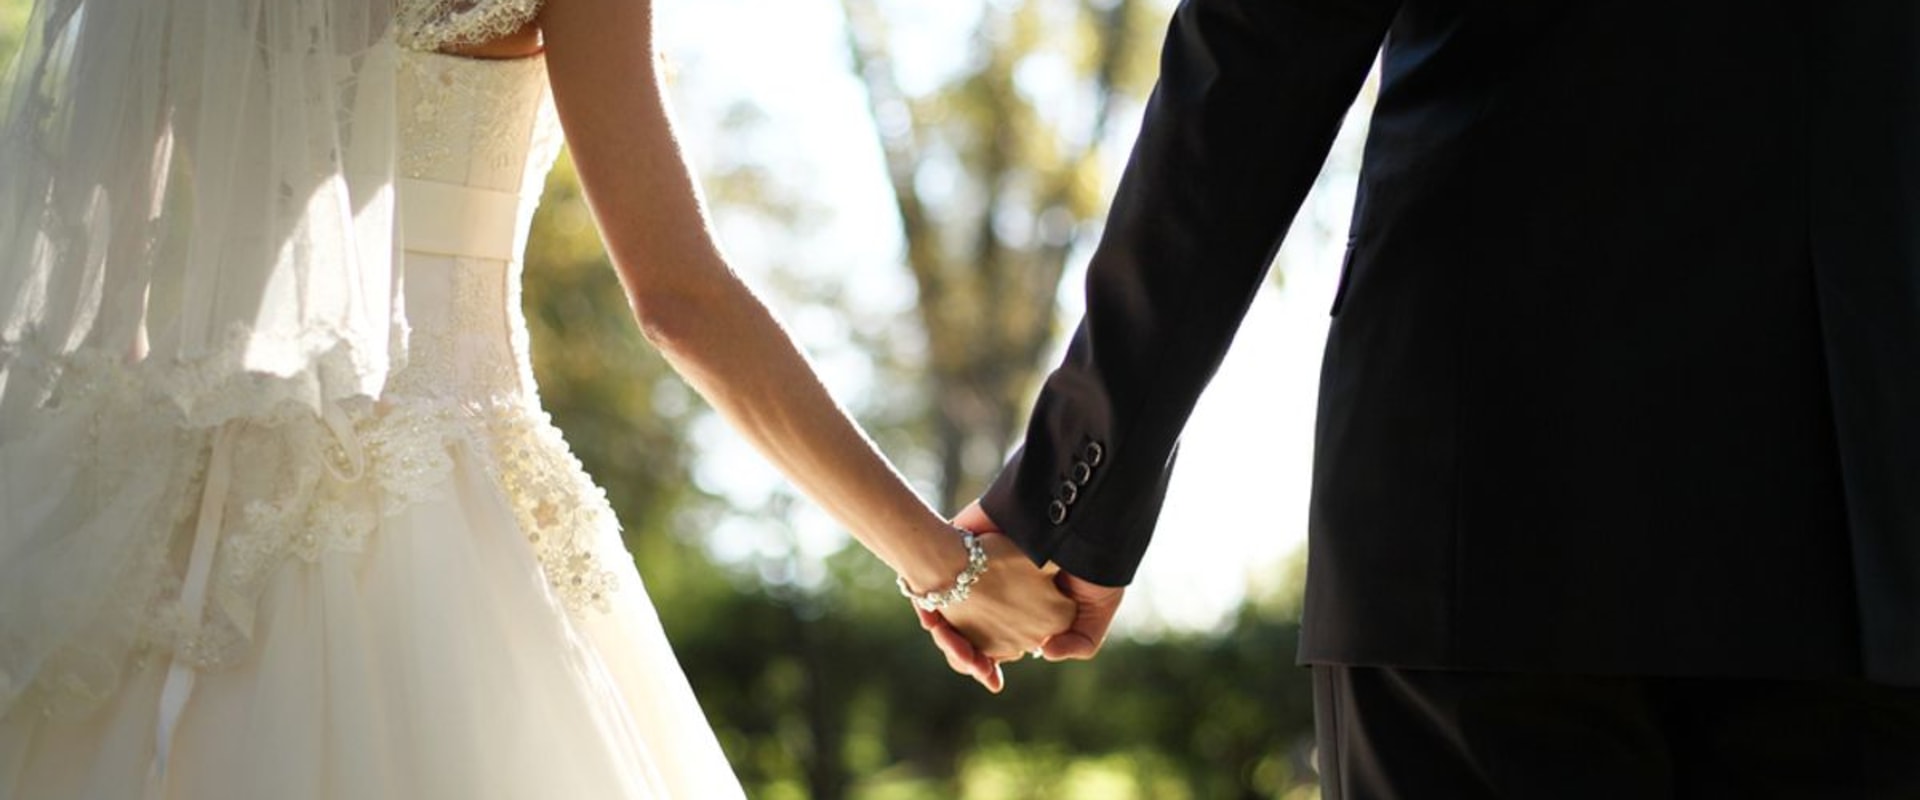 Will marriage become obsolete?